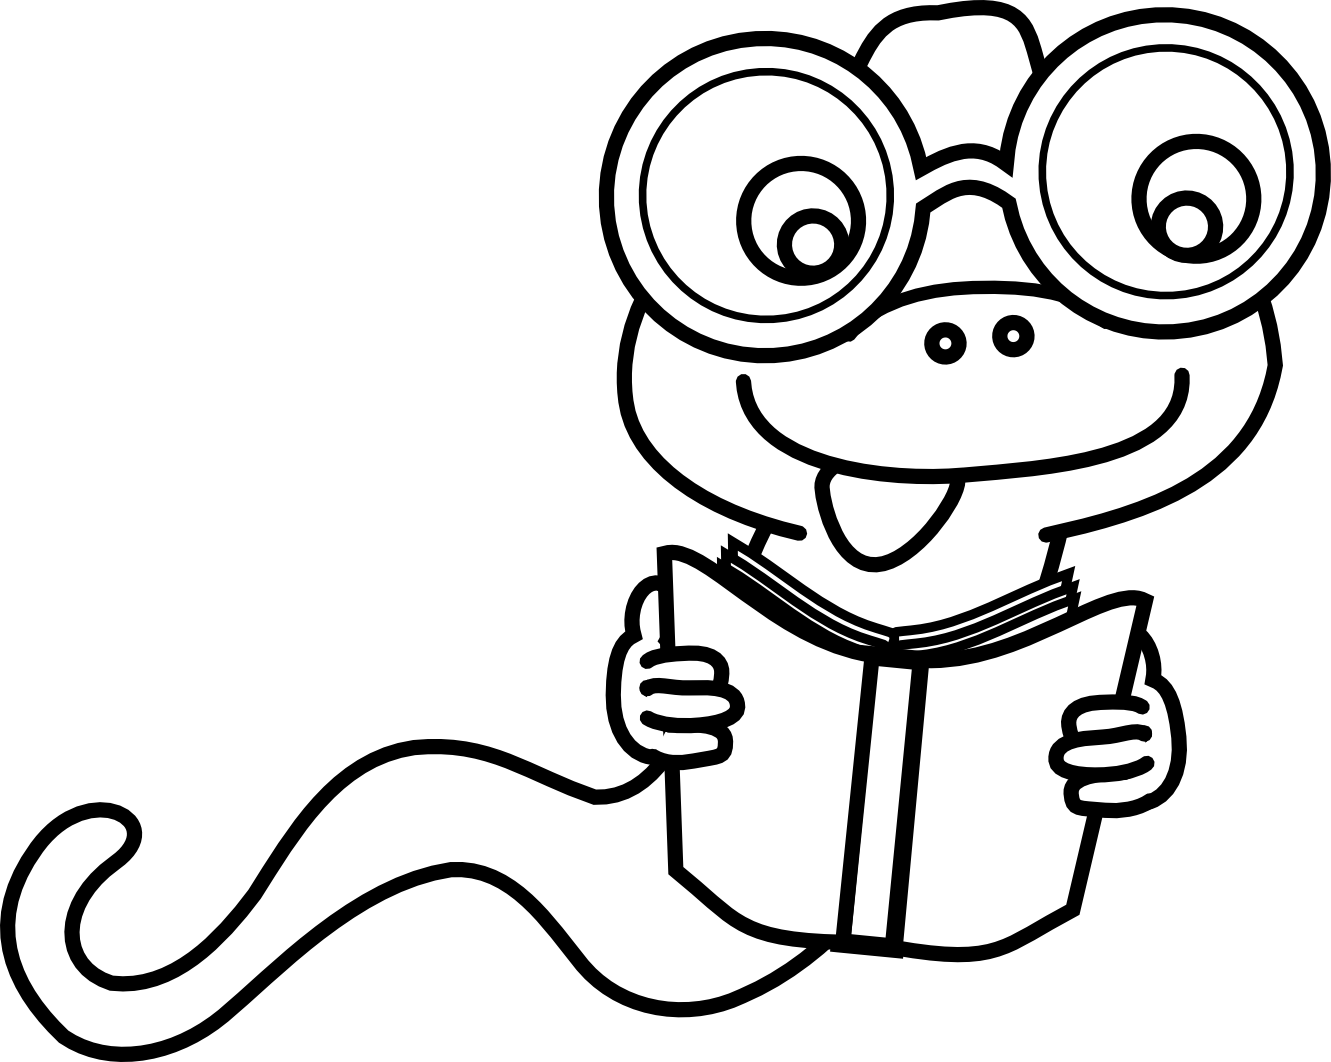 Book worm panda free. Working clipart black and white